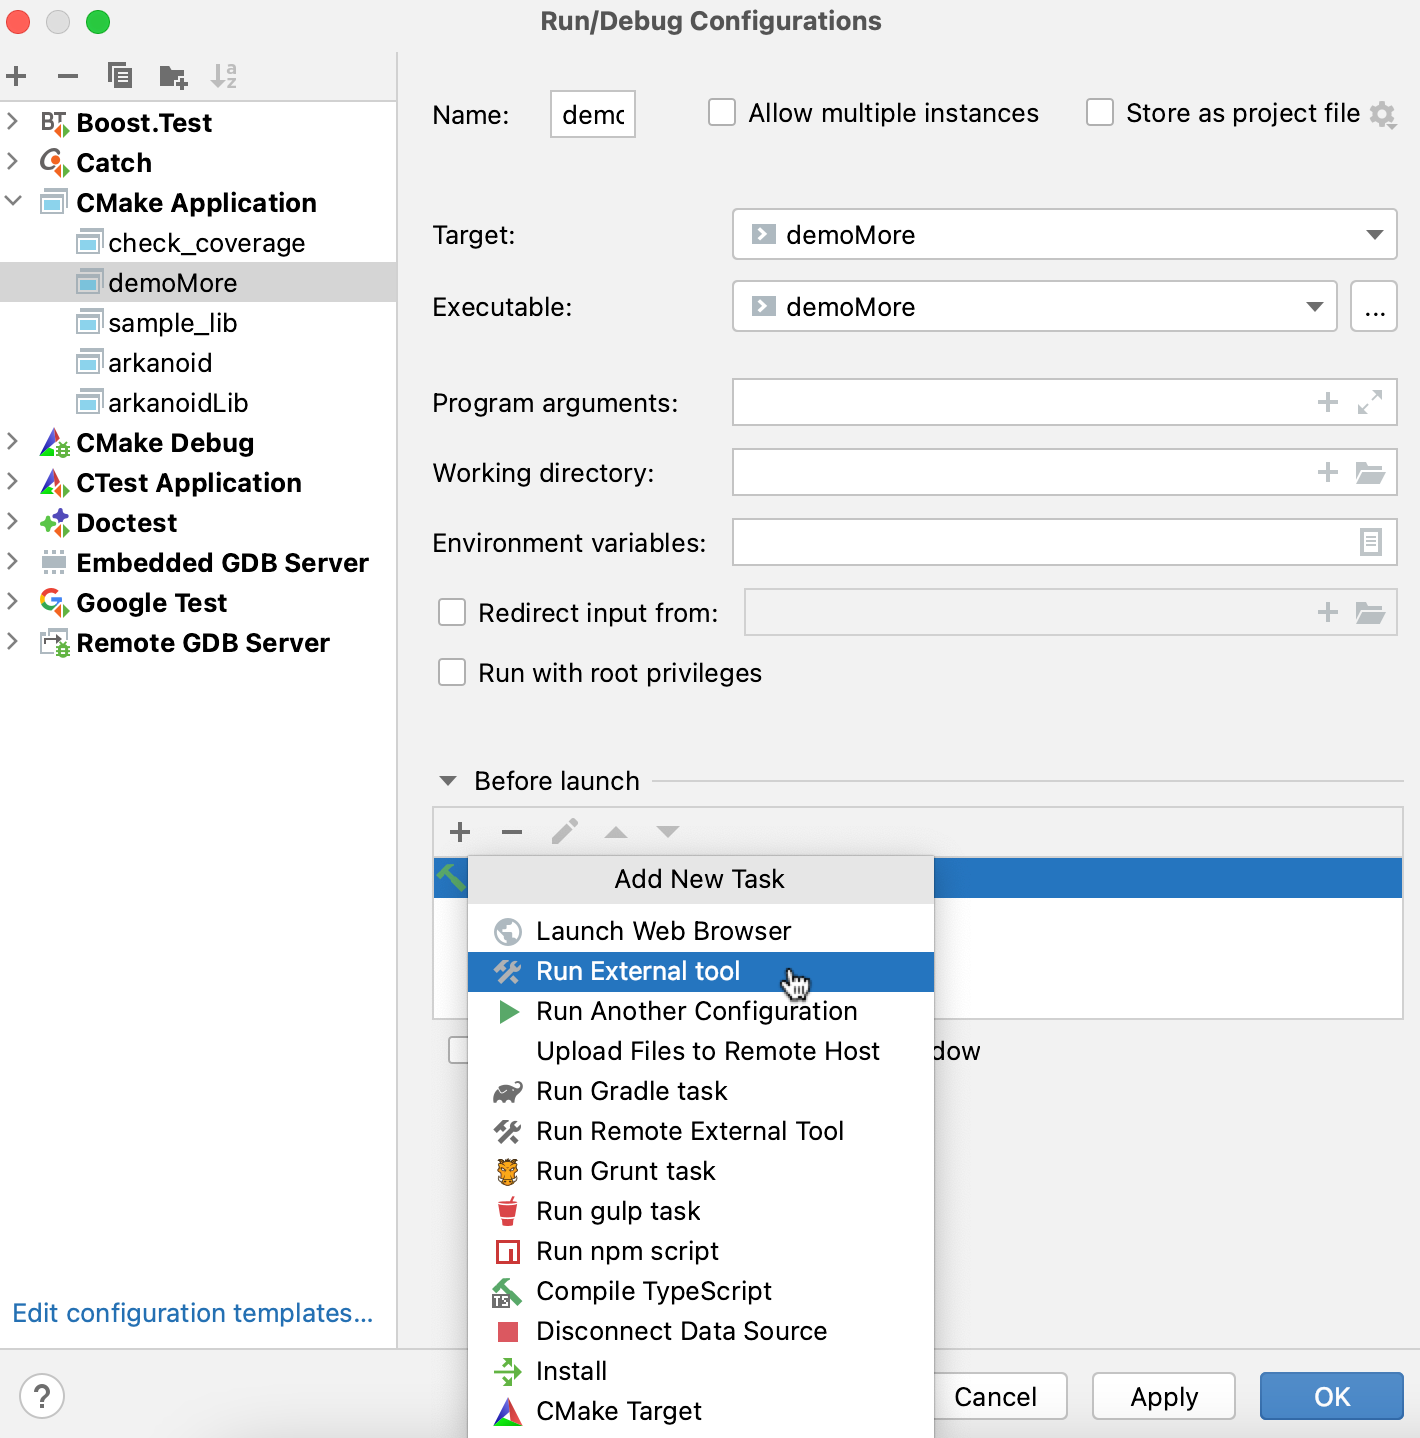 Run/debug configurations dialog - the Before launch list